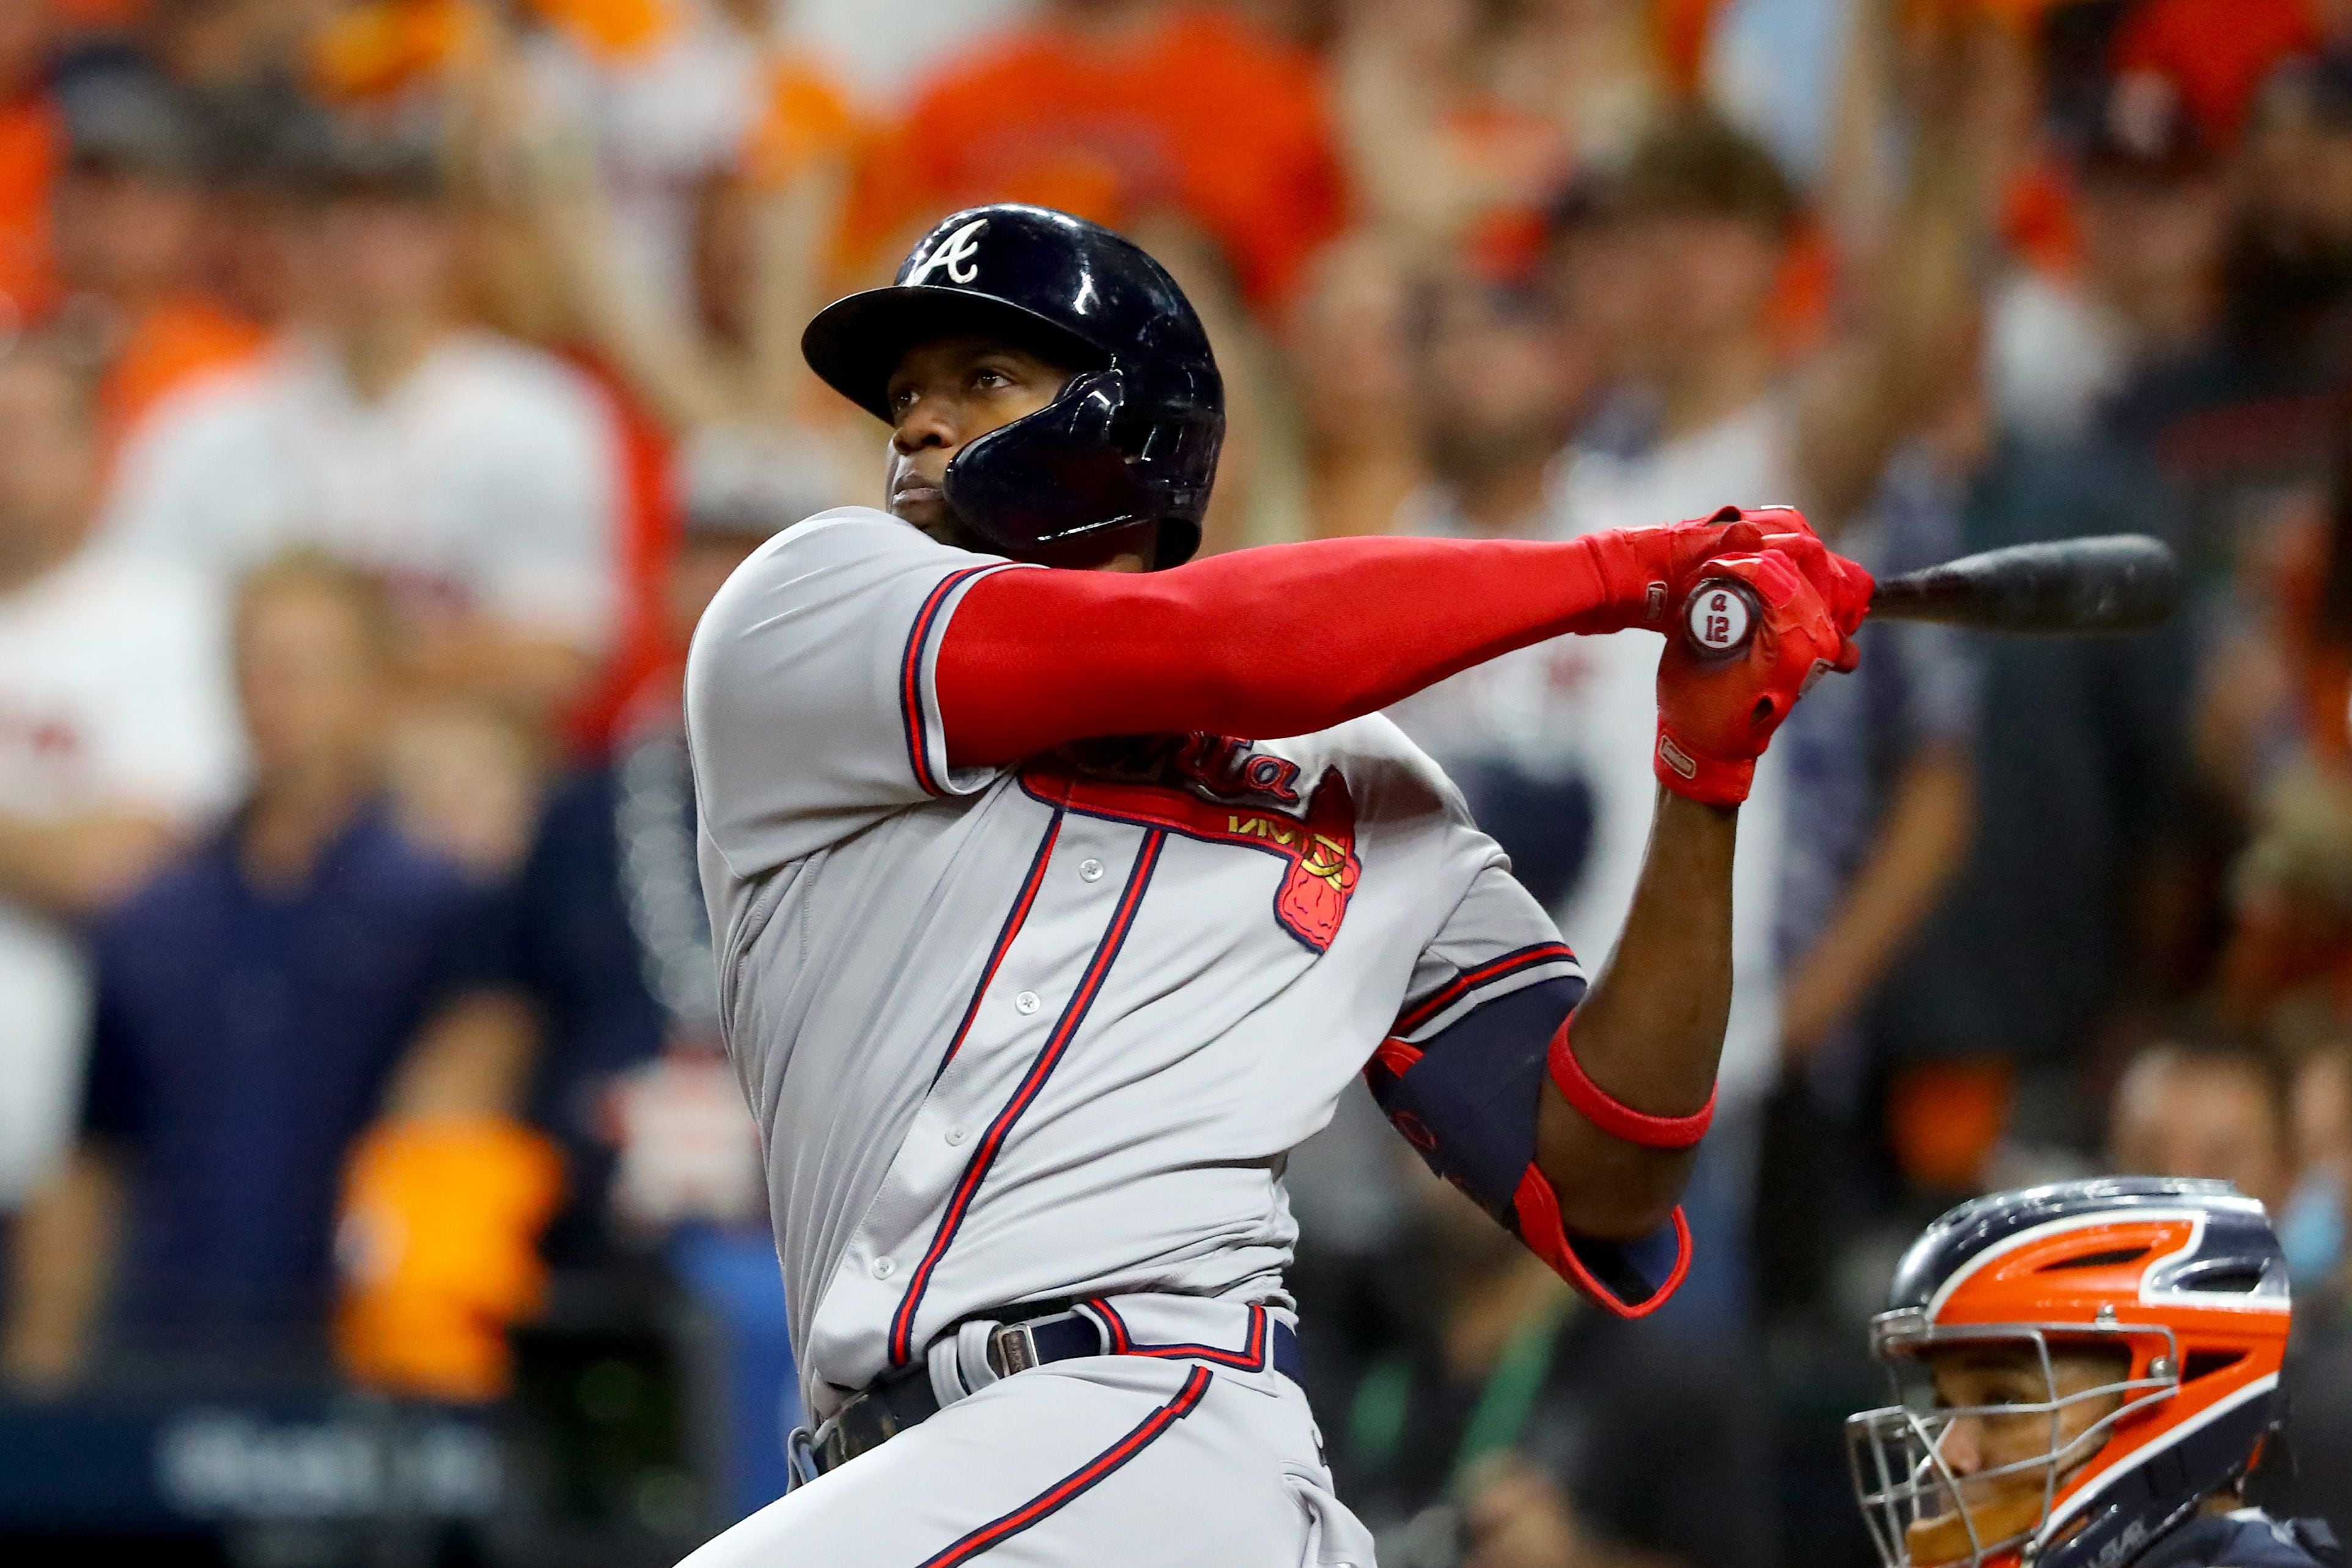 Stats to know about Braves' World Series victory